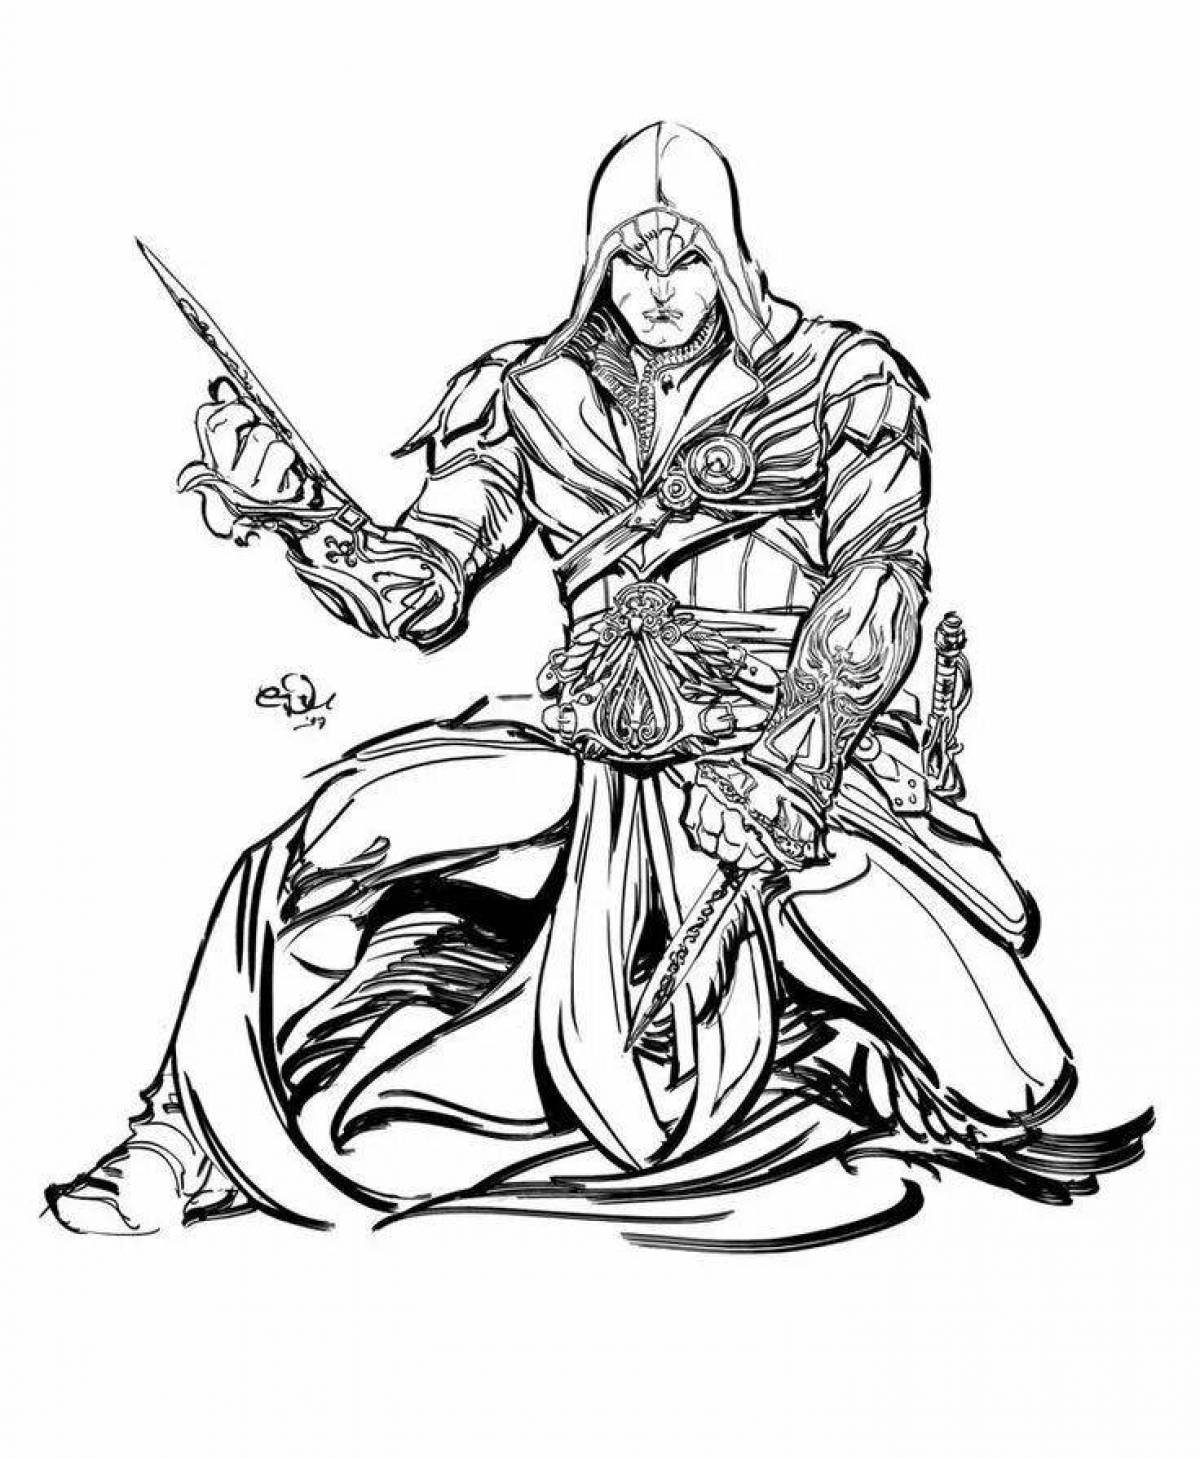 Assassincreed amazing coloring book